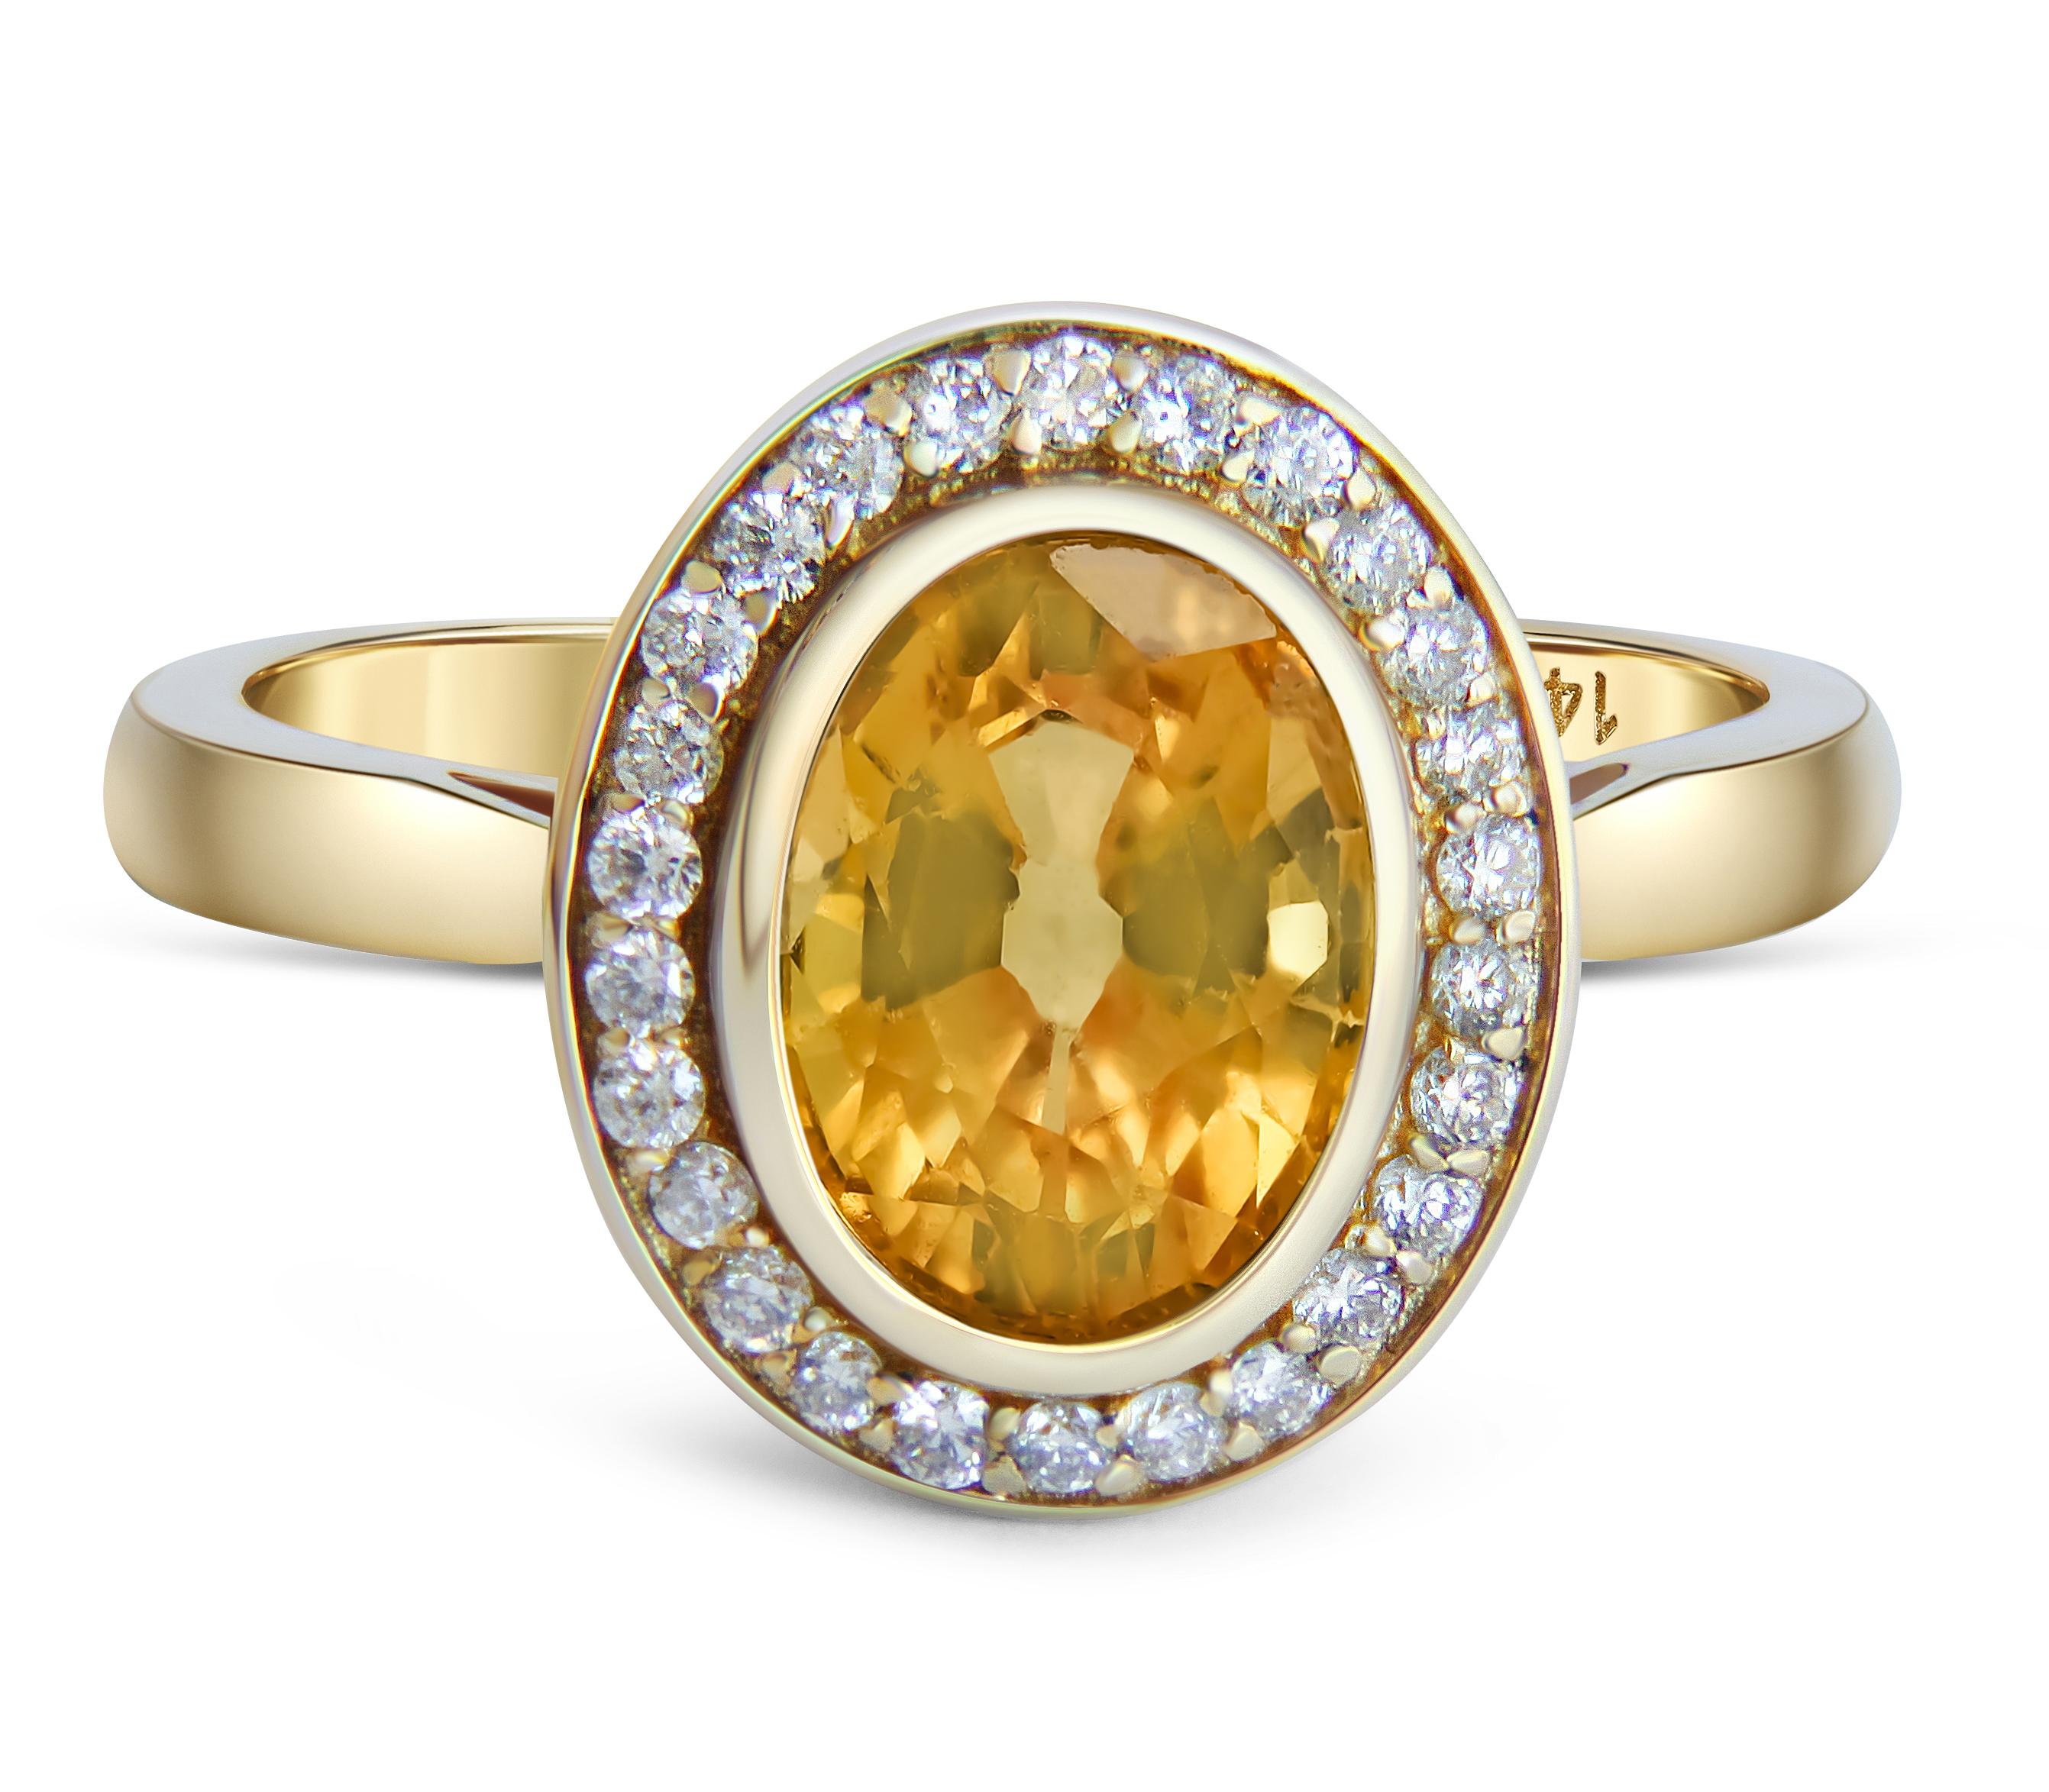 Sapphire and diamonds 14k gold ring. 
Oval Sapphire gold ring. Sapphire diamond halo ring. Yellow gemstone ring. September birthstone ring.

Metal: 14k gold
Weight: 3 gr depends from size

Gemstones:
Sapphire - 1 piece
Cut - oval
Color -